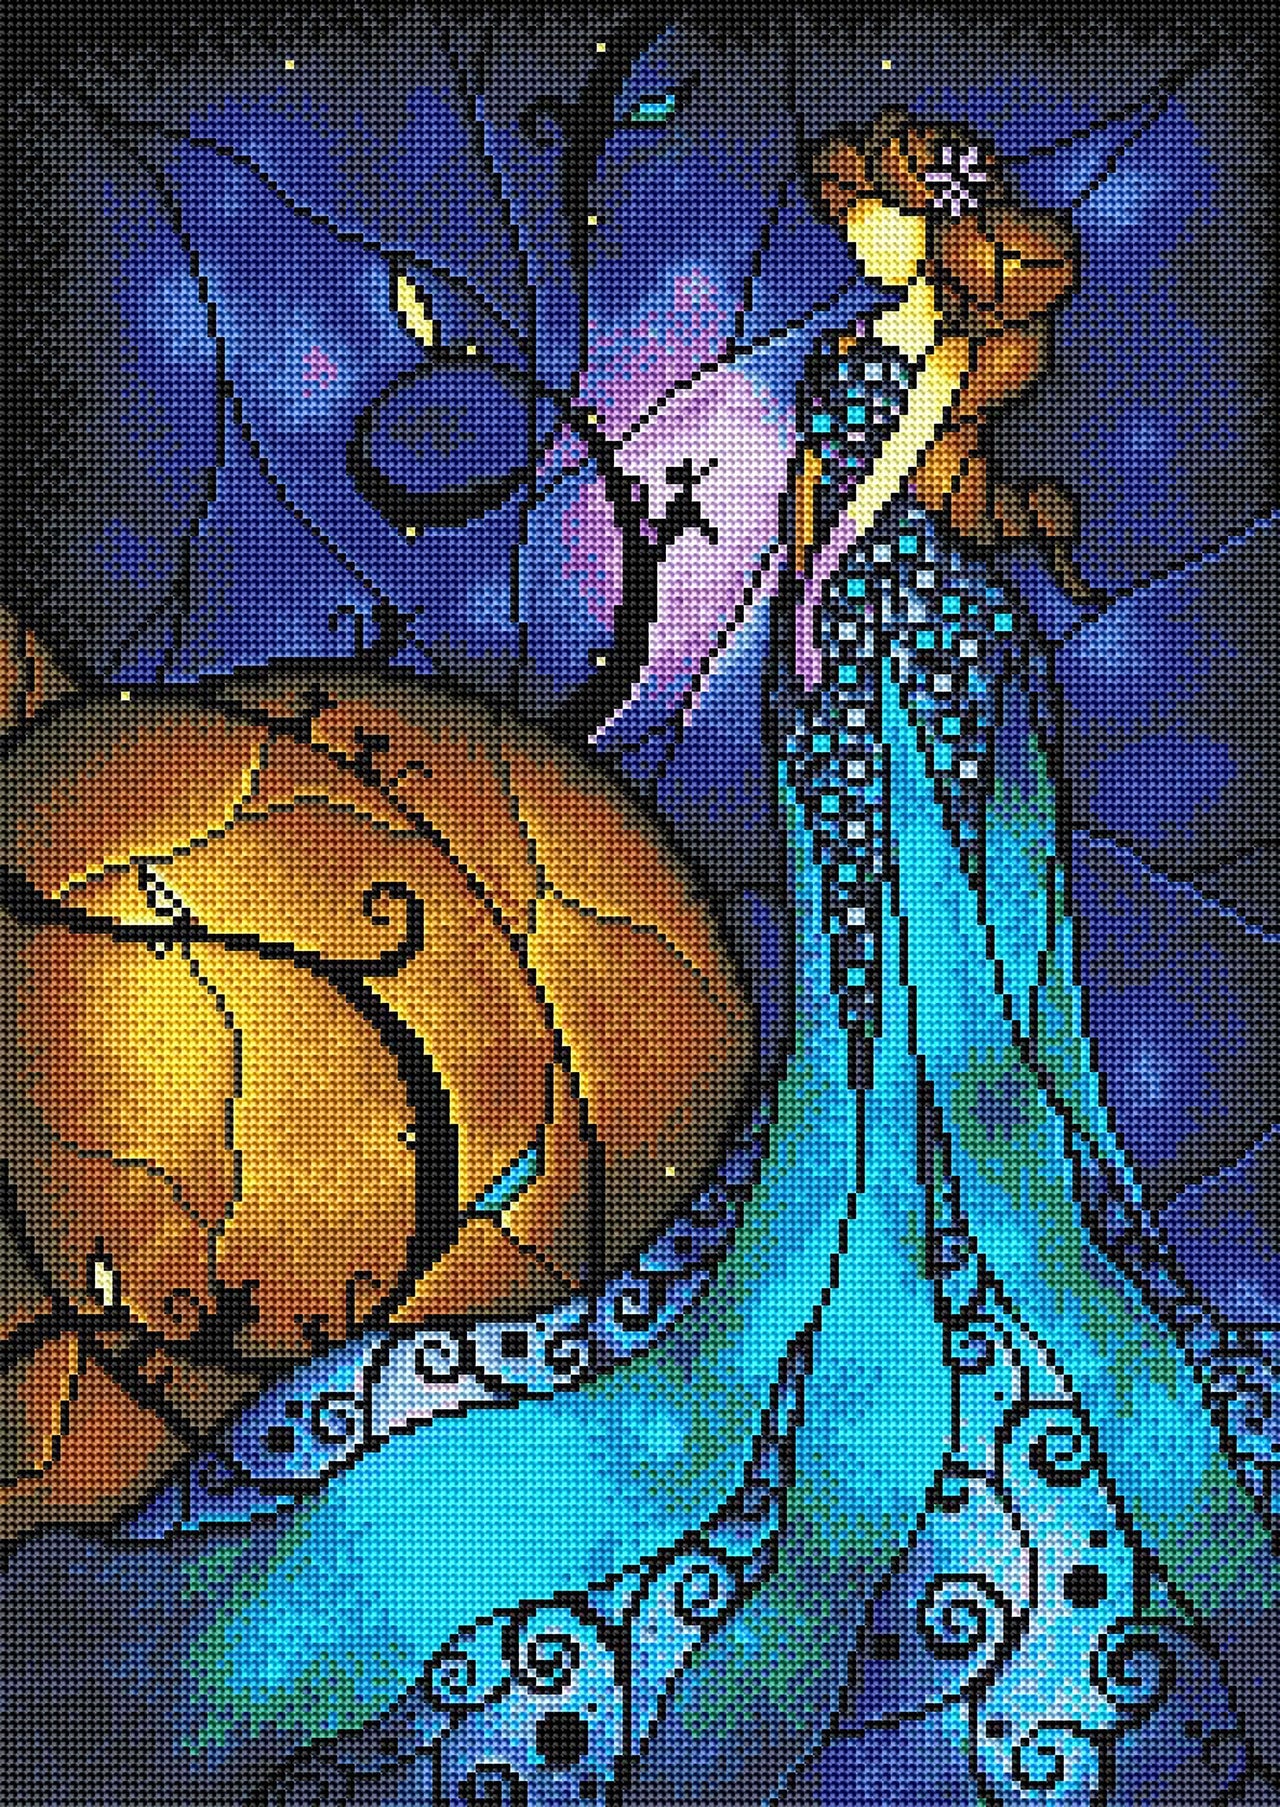 Diamond Painting Cinderella 16.5″ x 23.2″ (42cm x 59cm) / Round With 33 Colors including 1 AB / 30,936